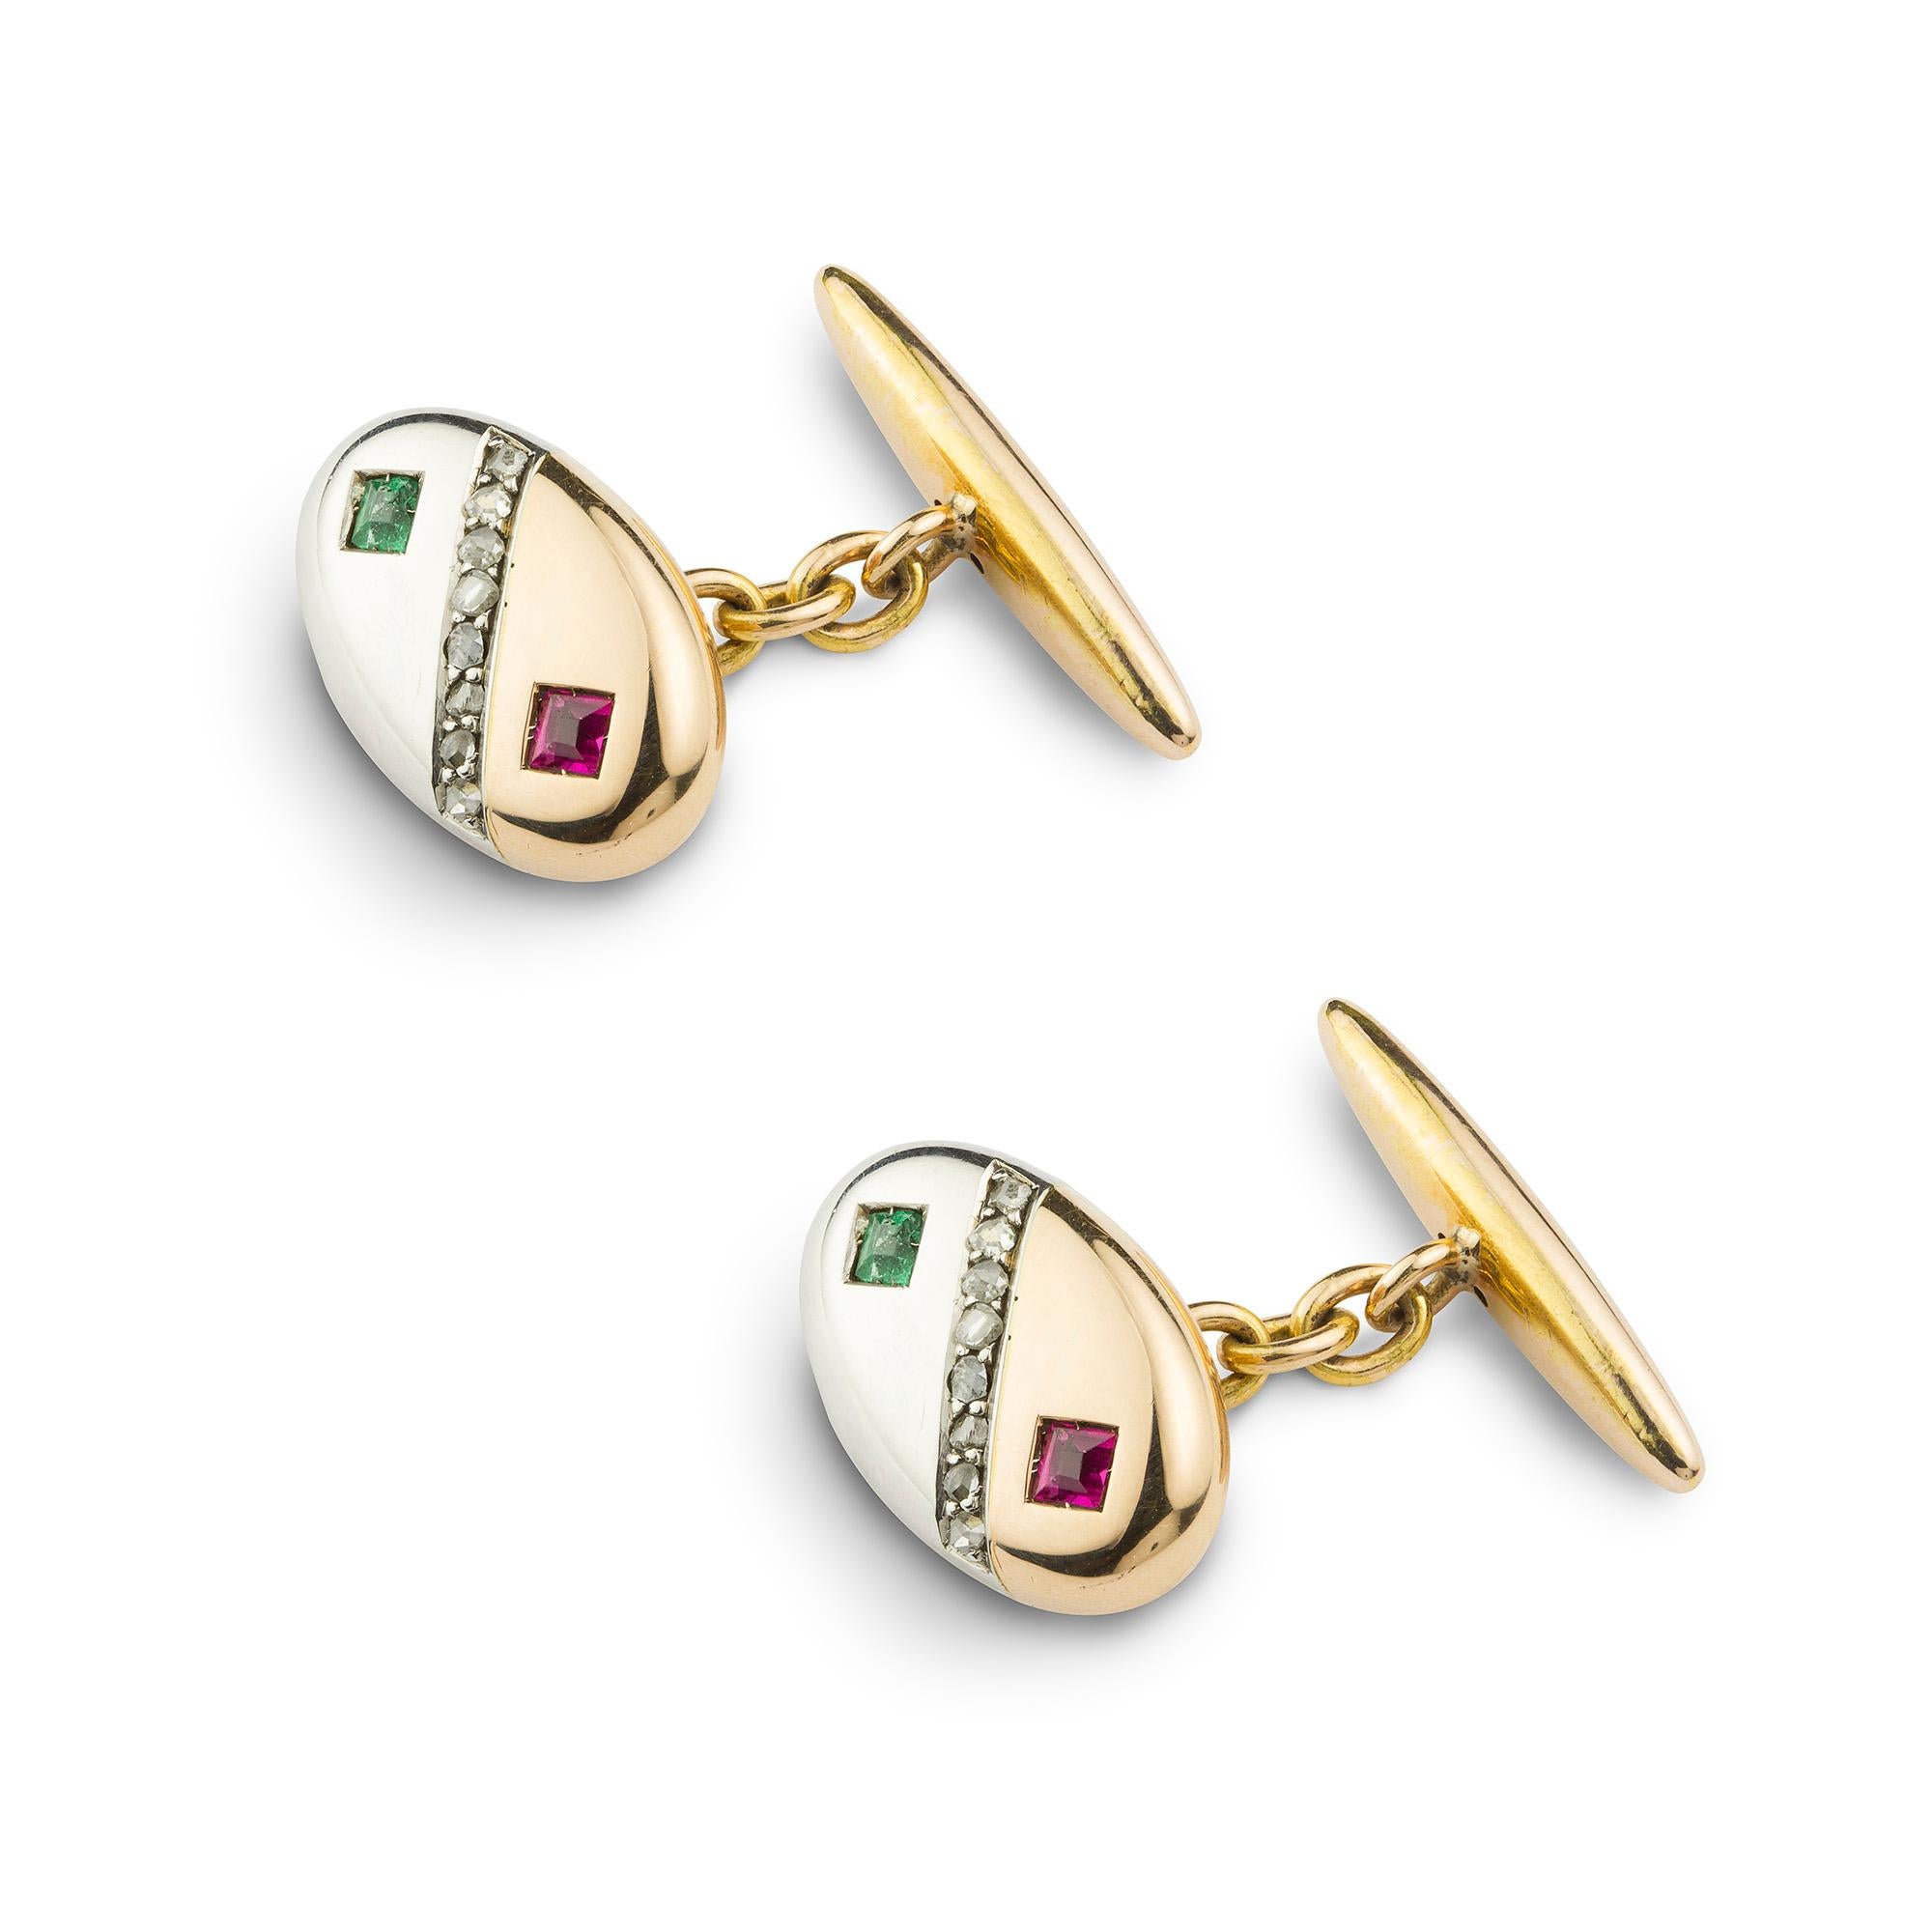 A pair of turn-of-the-century oval yellow and white gold gemset cufflinks, each cufflink comprising an oval plaque, set at a diagonal with yellow and white gold, separated with a stripe of rose-cut diamonds, the yellow gold section set to the centre